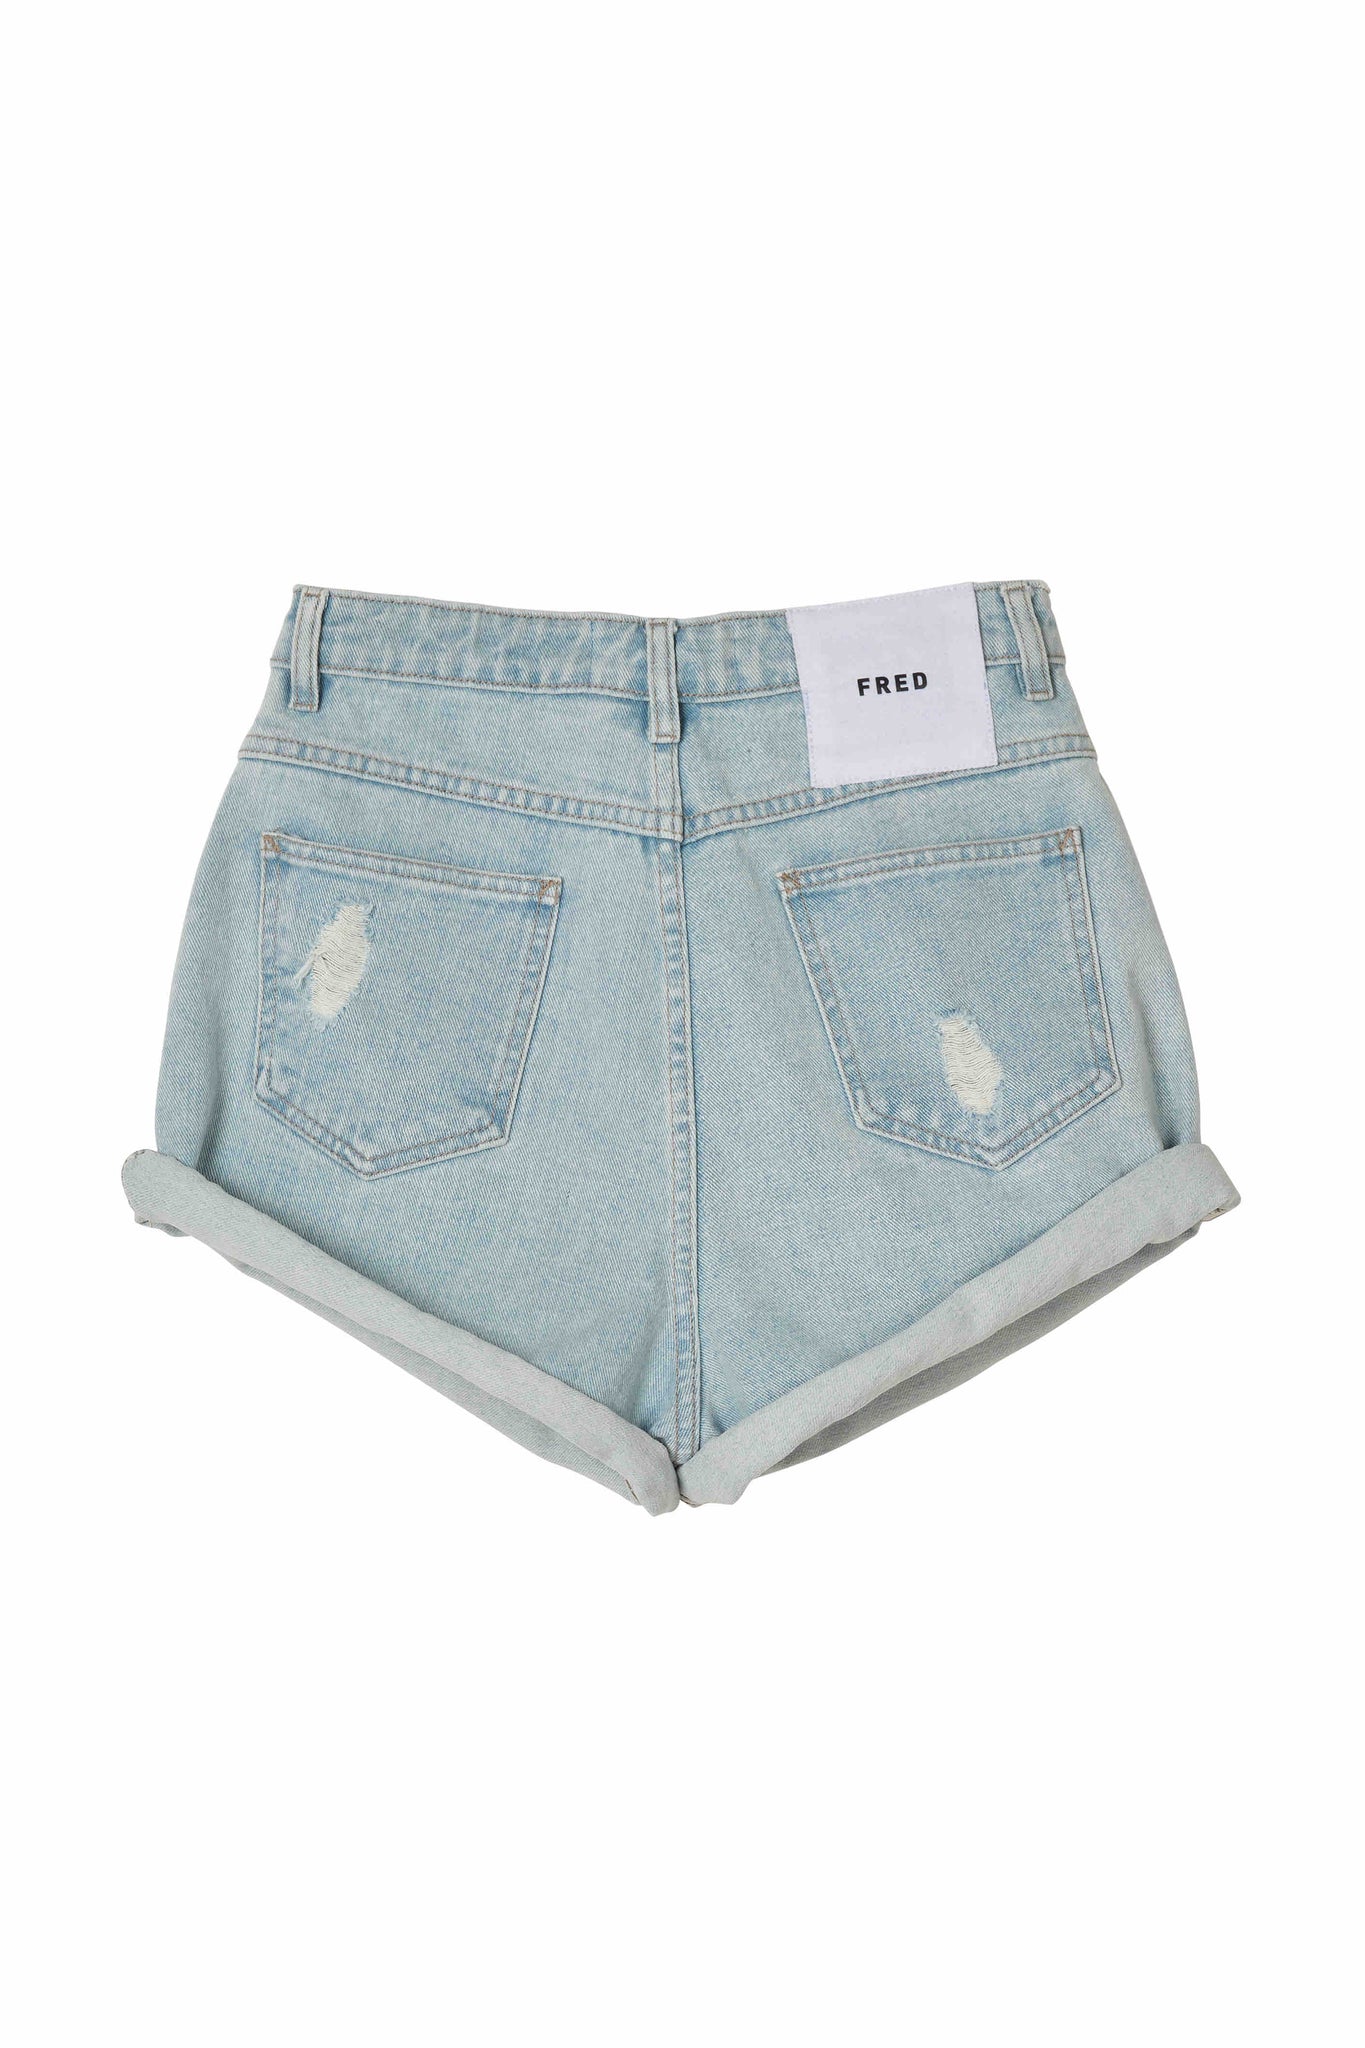 ROLL UP SHORTS in BLUE